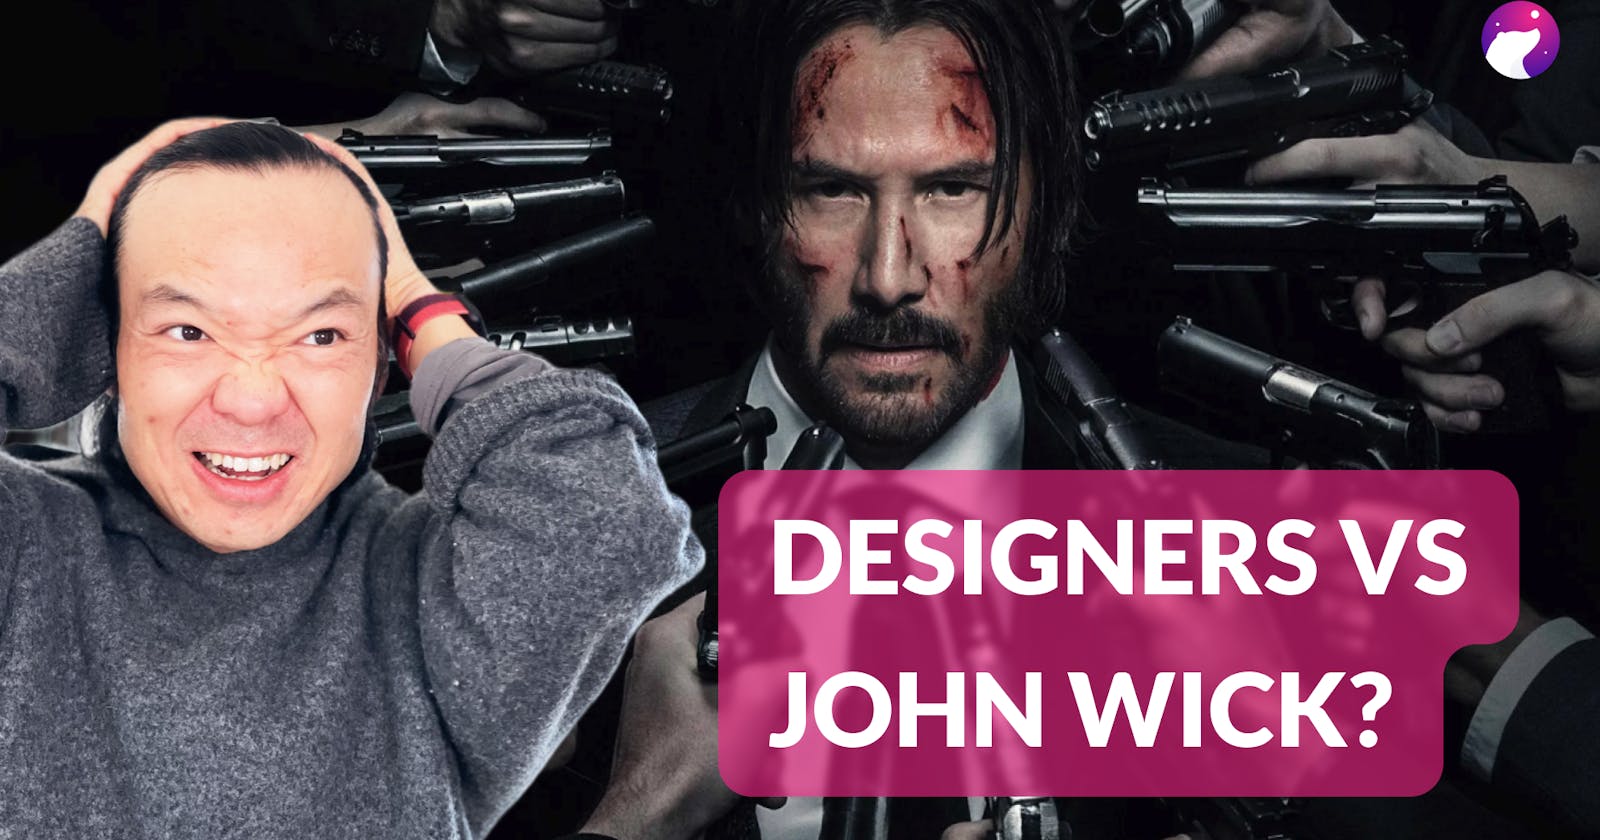 John Wick Meets UX: How to Fight the 'Me Against the World' Mentality